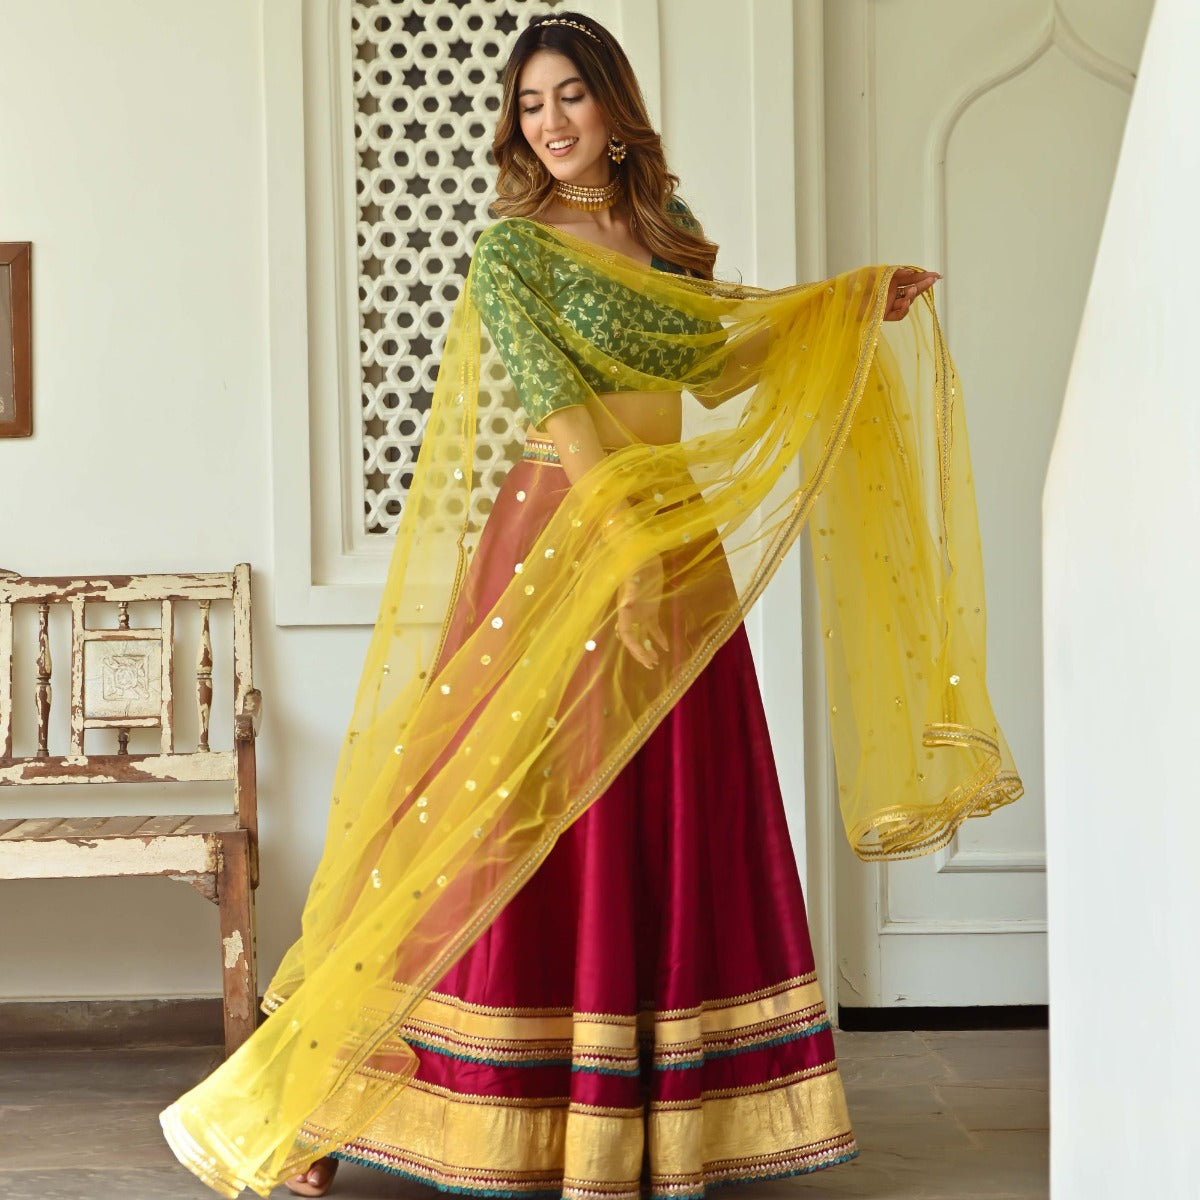 Pink Ethnic Semi-Stitched : Buy Pink Ethnic Green Georgette Semi-Stitched  Lehenga & Unstitched Blouse And Dupatta (Set of 3) Online | Nykaa Fashion